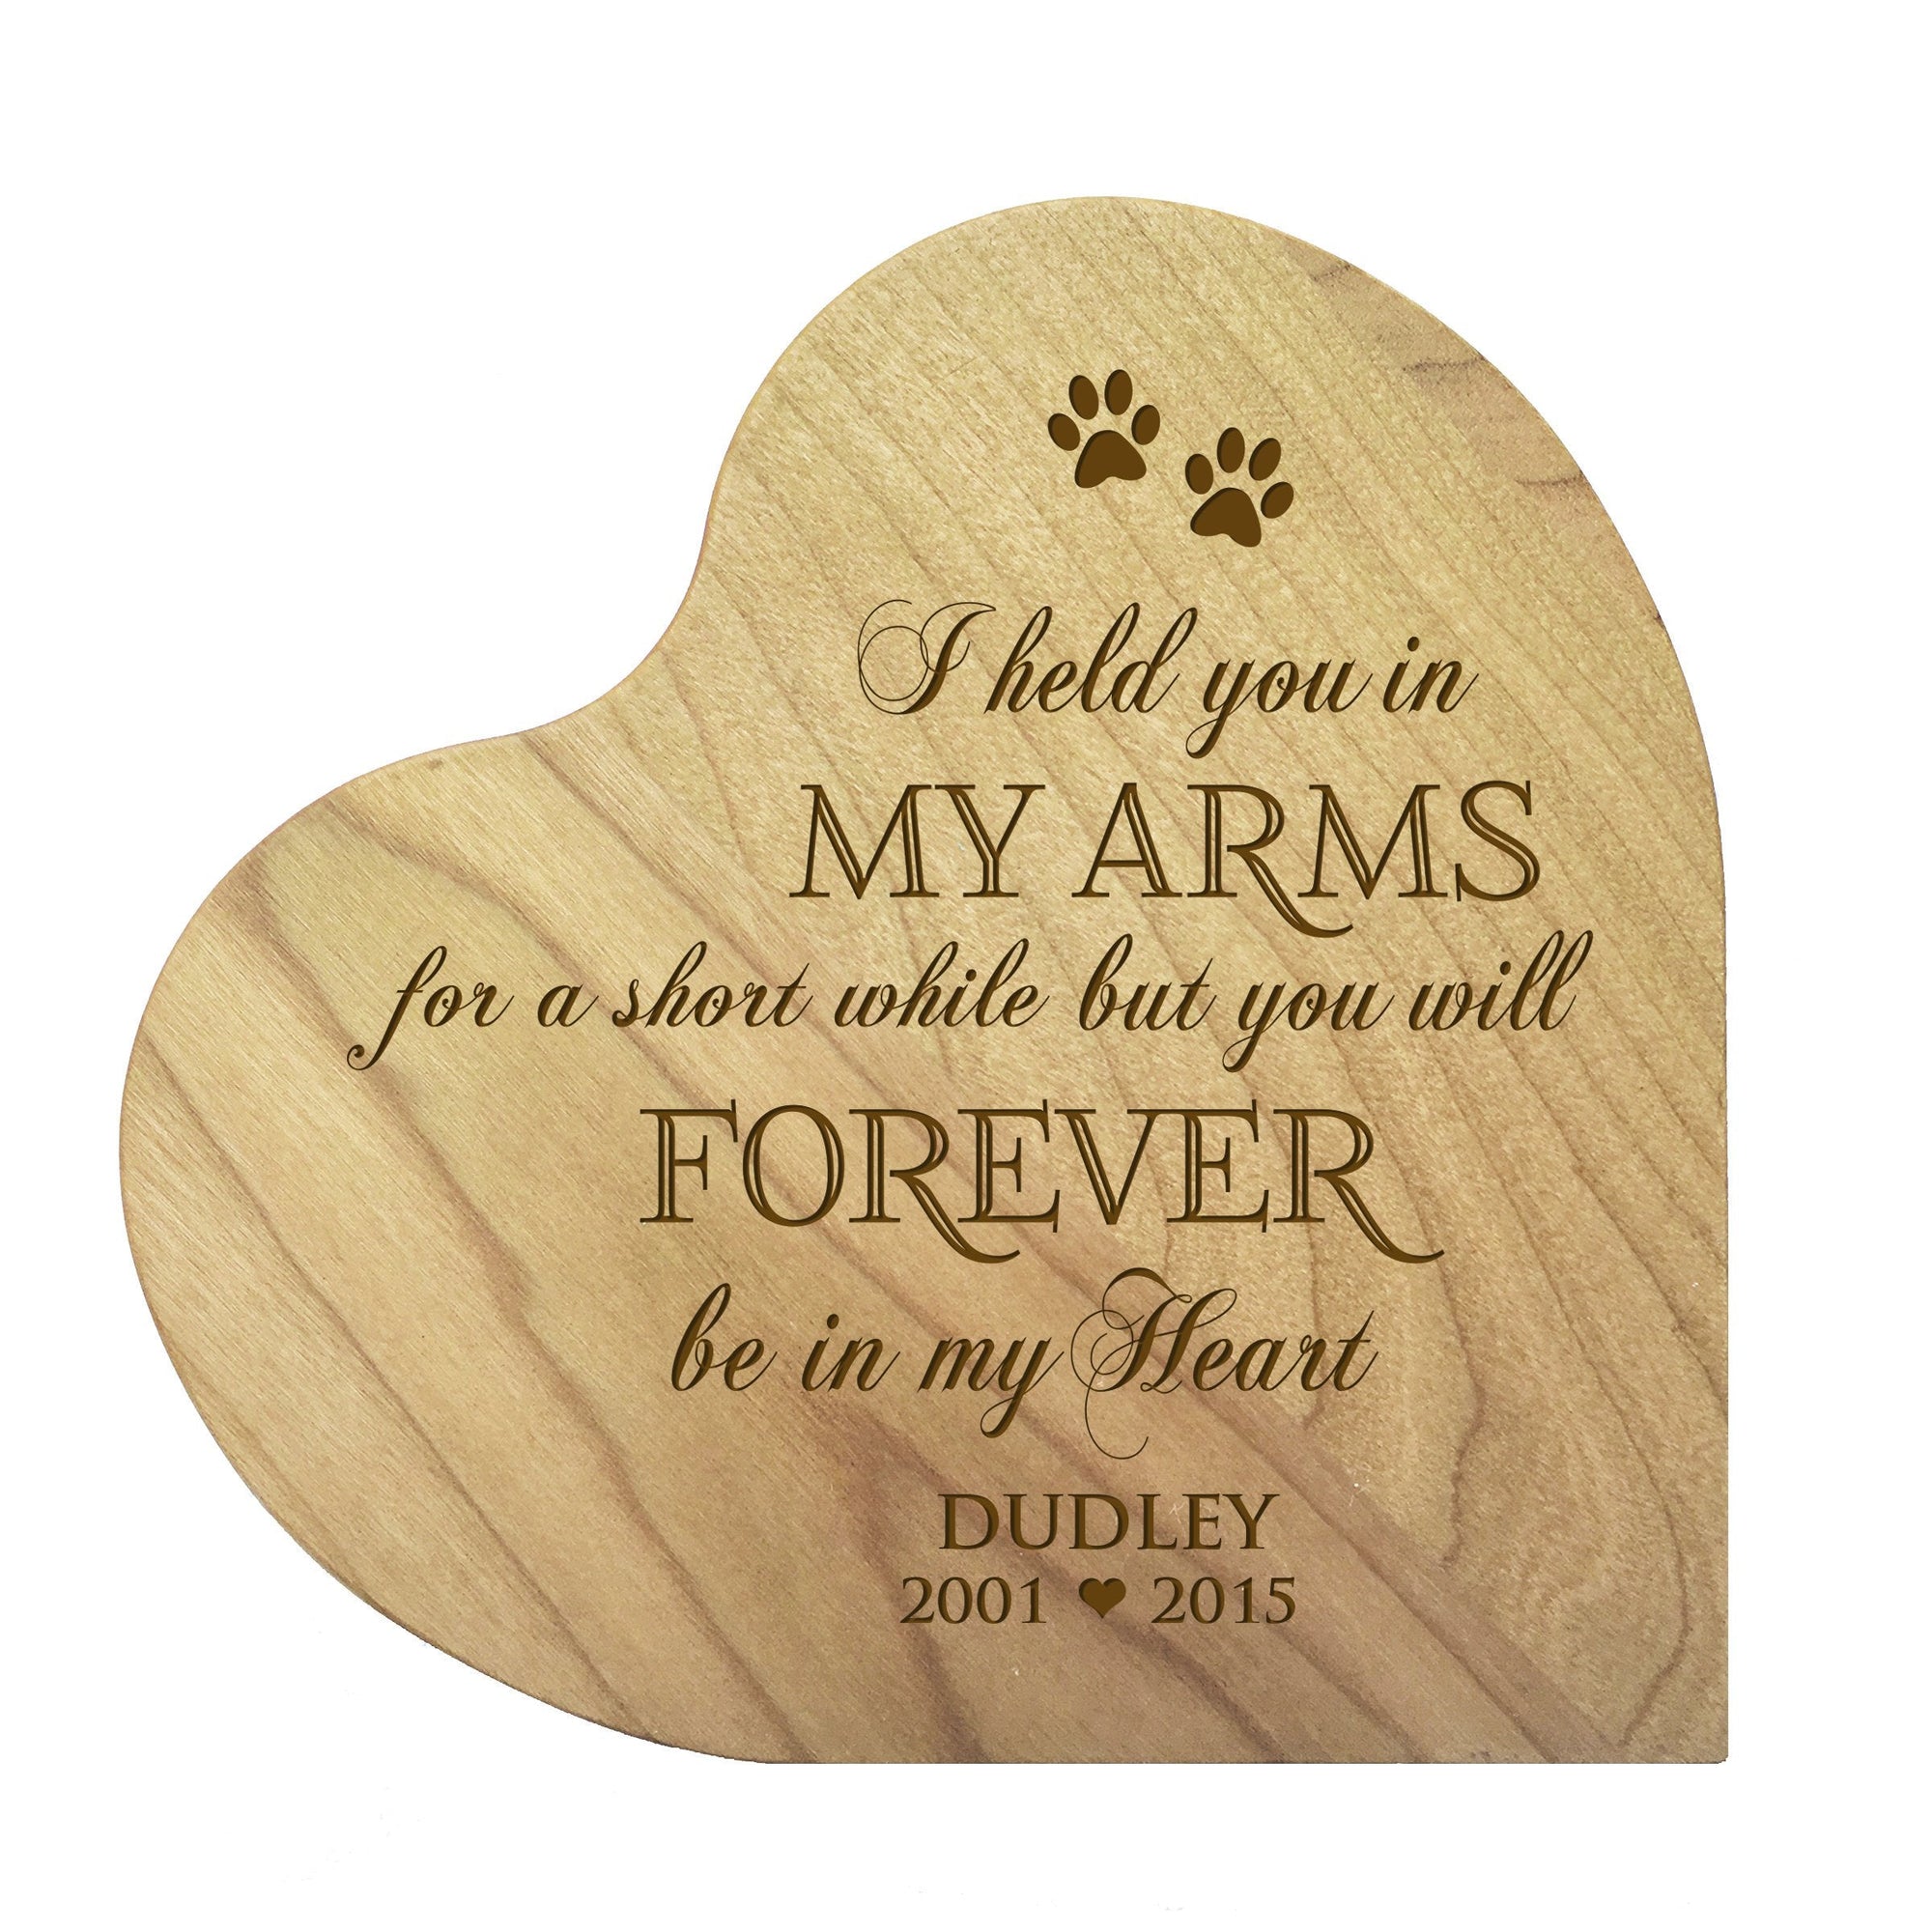 Maple Pet Memorial Heart Block Decor with phrase "I Held You In My Arms"